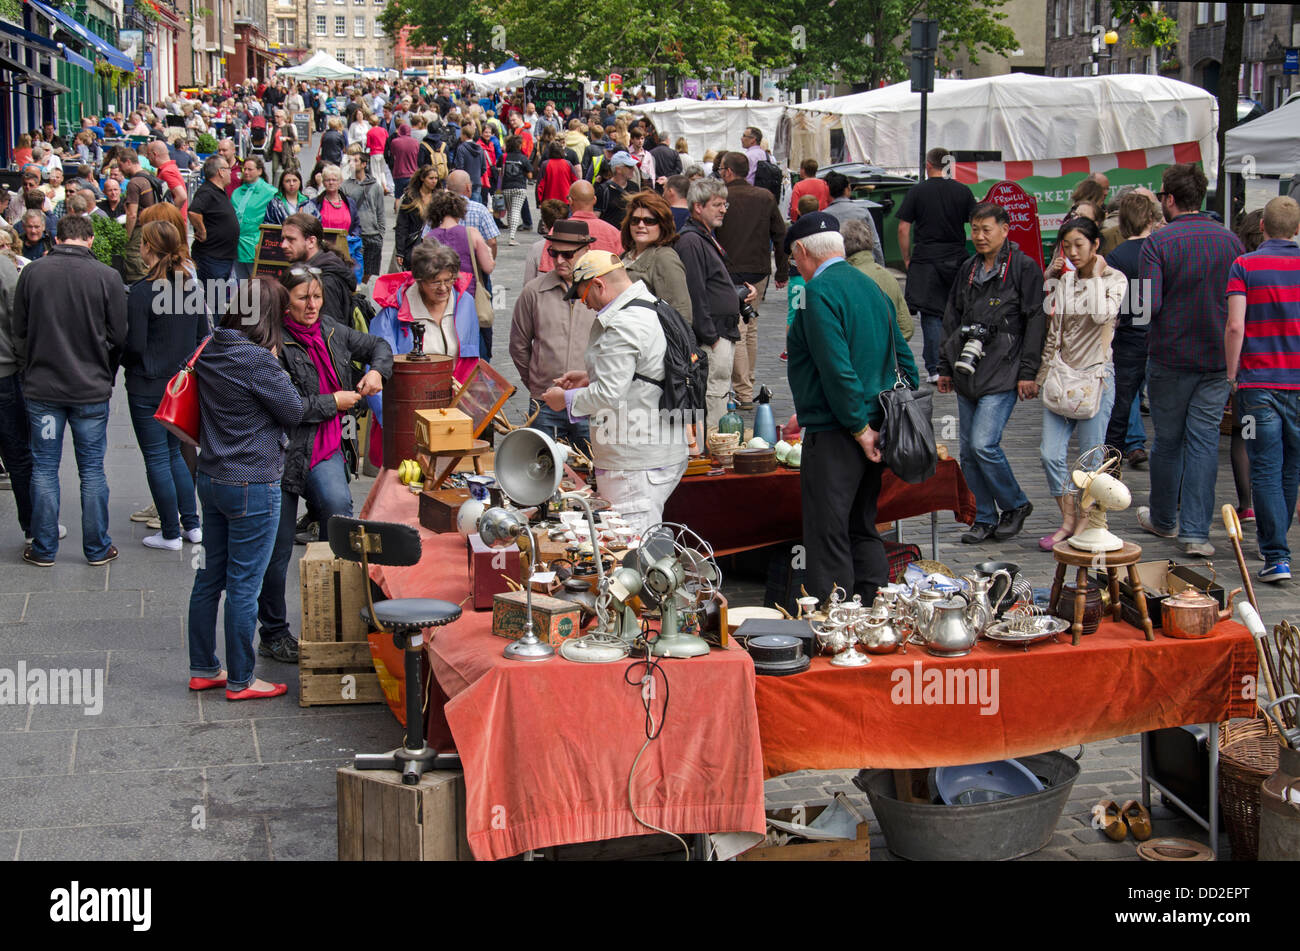 Tourists and locals mingle during the annual Grassmarket Fair held every August in Edinburgh. Stock Photo